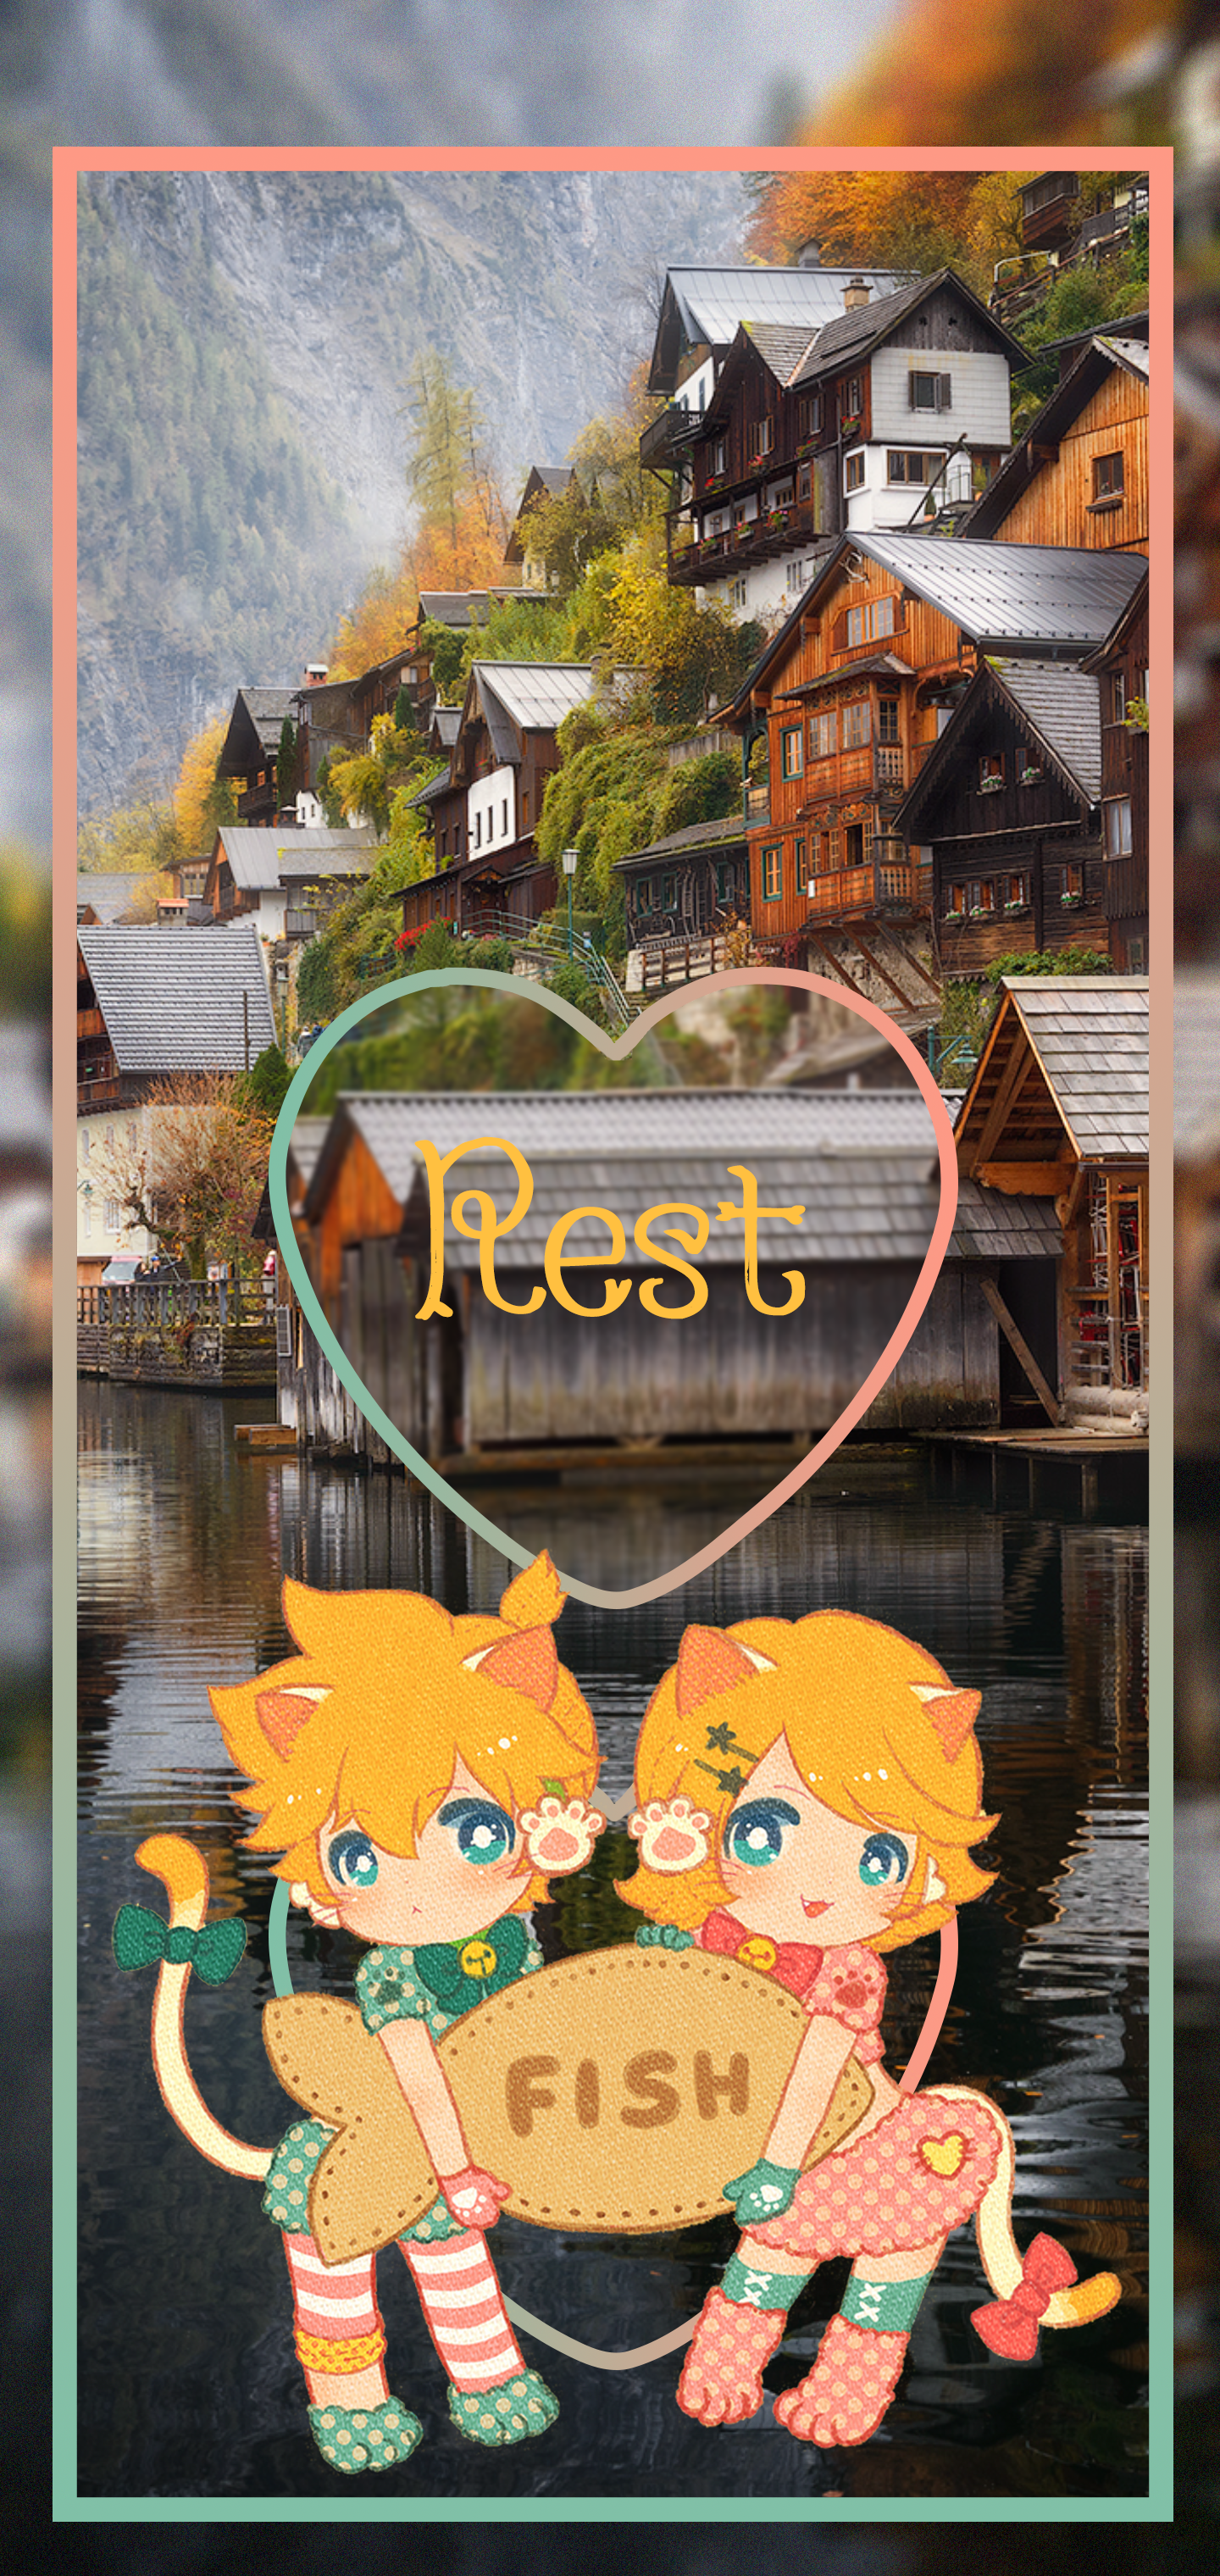 Picture In Picture Anime Girls Kagamine Len Kagamine Rin Anime Boys Anime Vocaloid 1440x3040